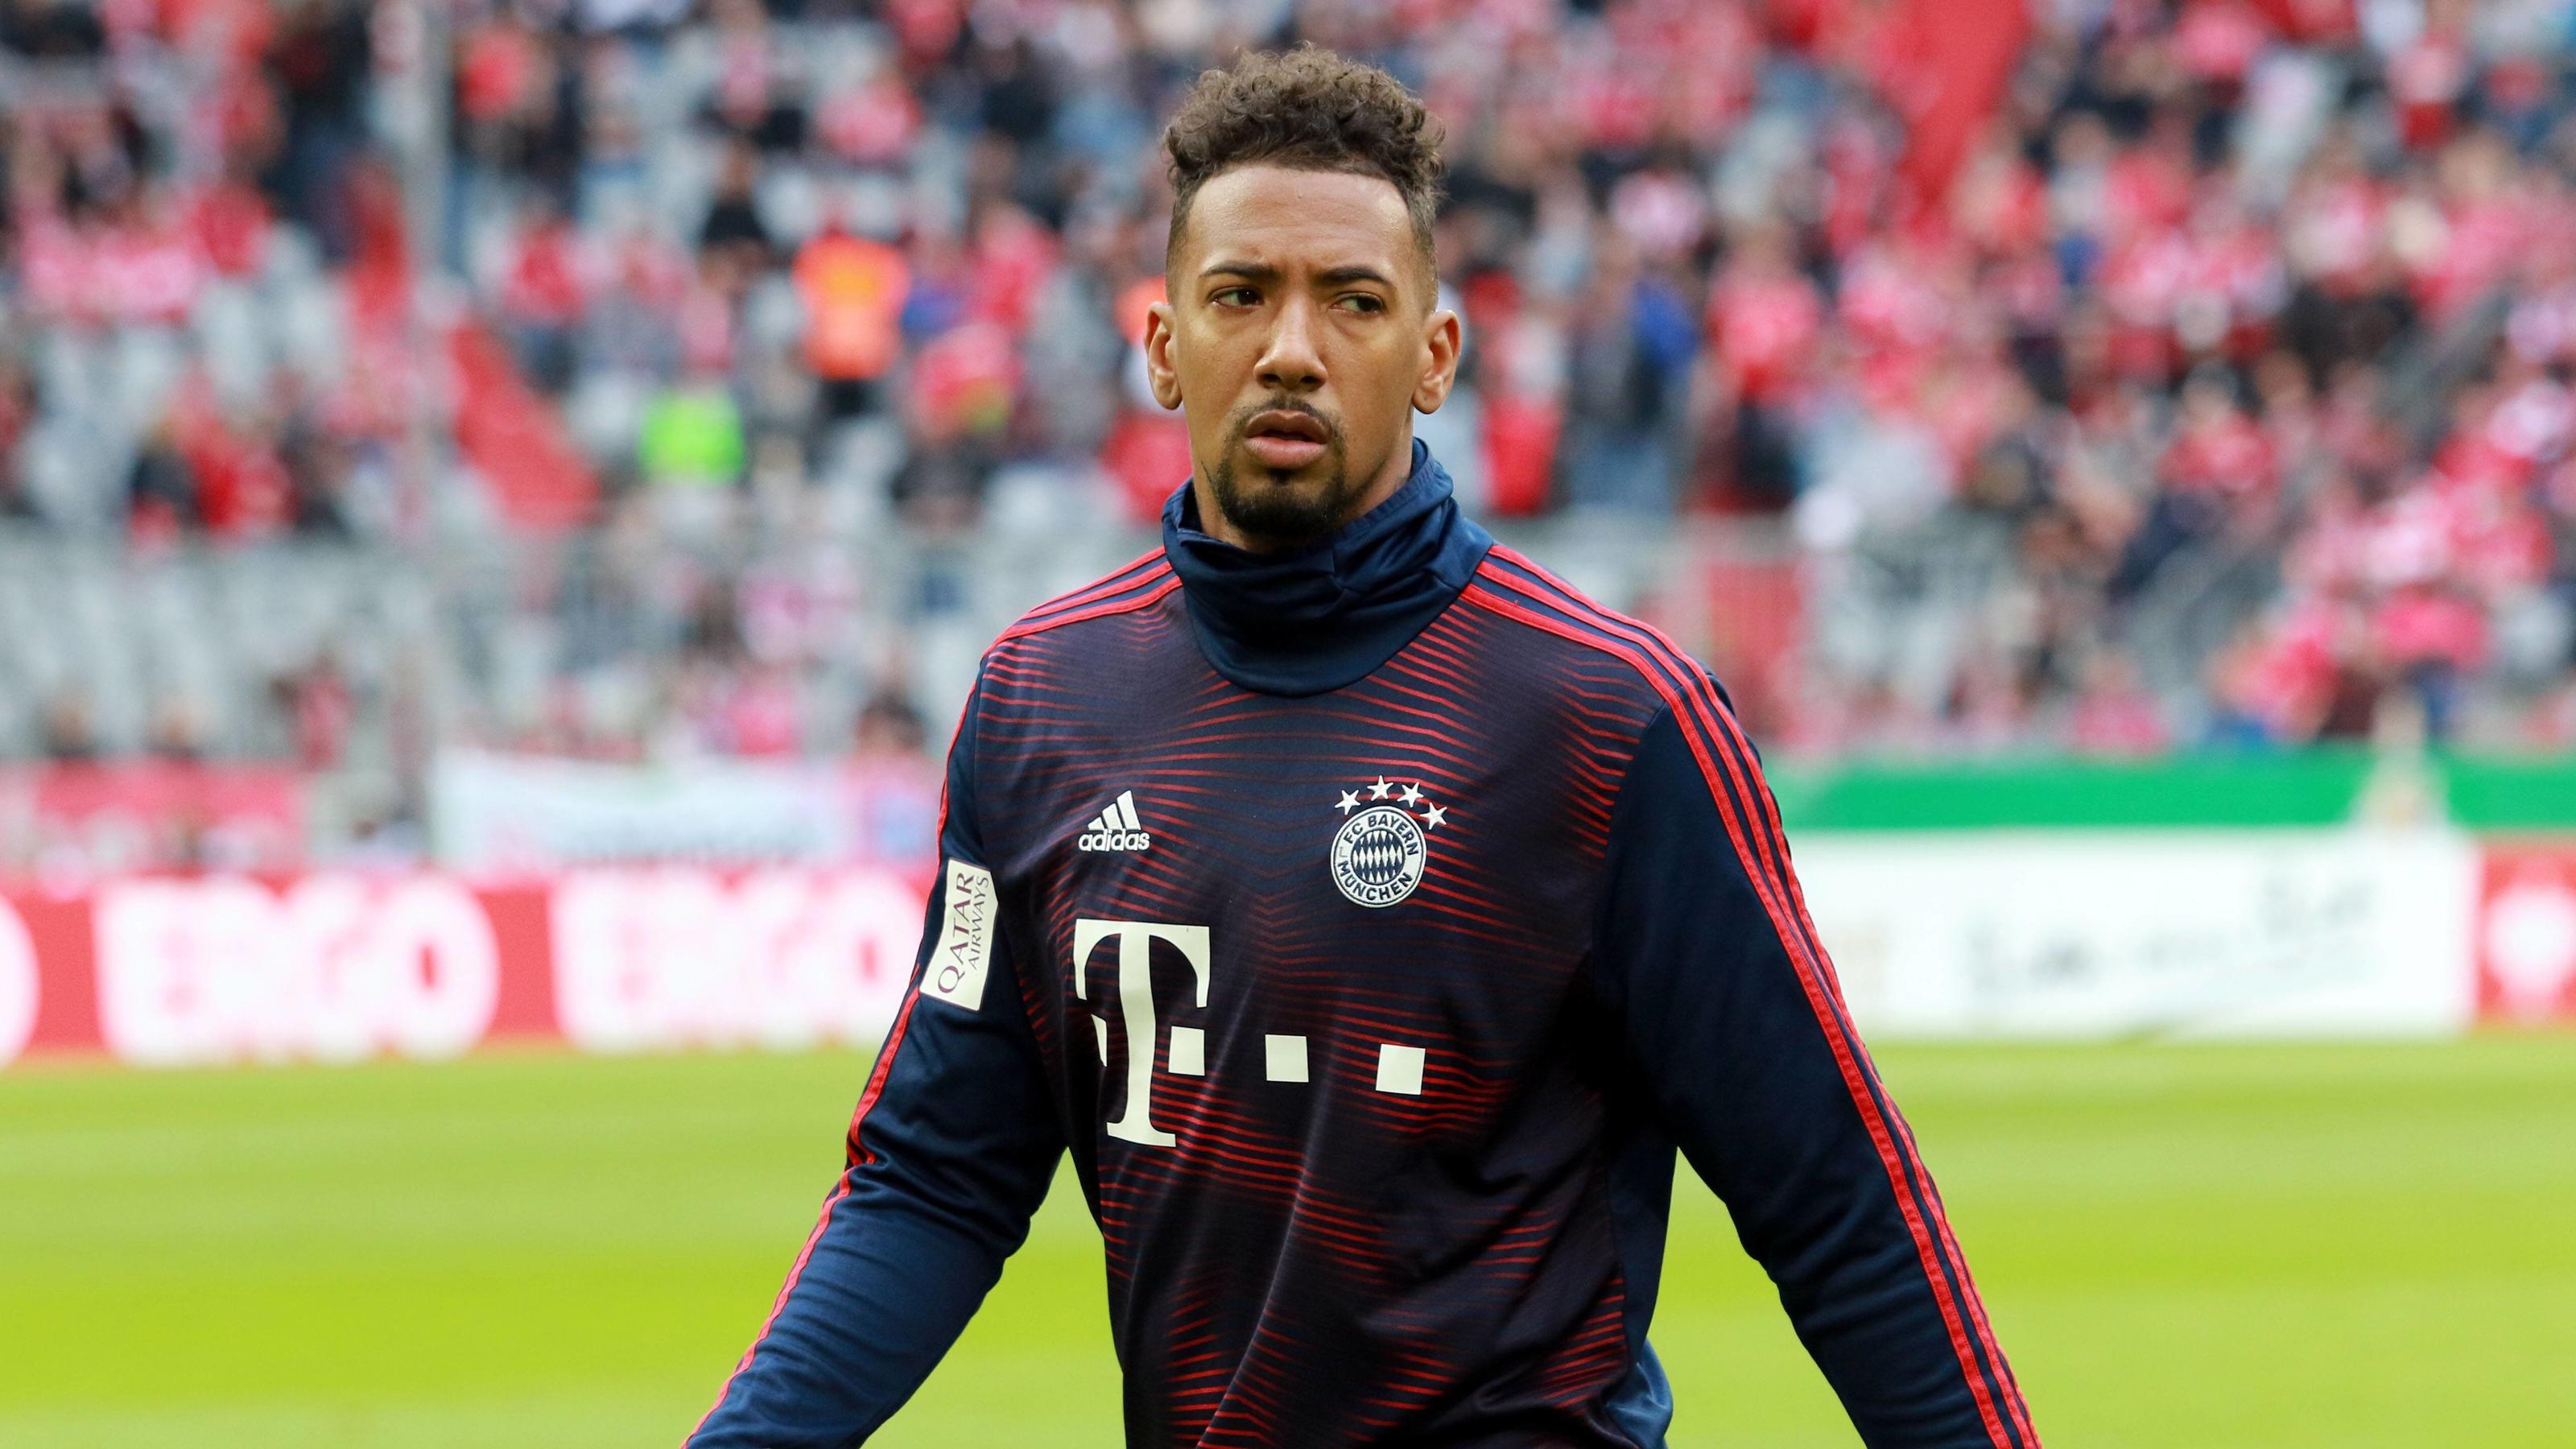  Jerome Boateng FC Bayern / Fussball / Allianz Arena München / DFB-Pokal / FC Bayern München - 1. FC Heidenheim 1846 / 03.04.2019 / DFL AND DFB REGULATIONS PROHIBIT ANY USE OF PHOTOGRAPHS AS IMAGE SEQUENCES AND/OR QUASI-VIDEO. *** Jerome Boateng FC B